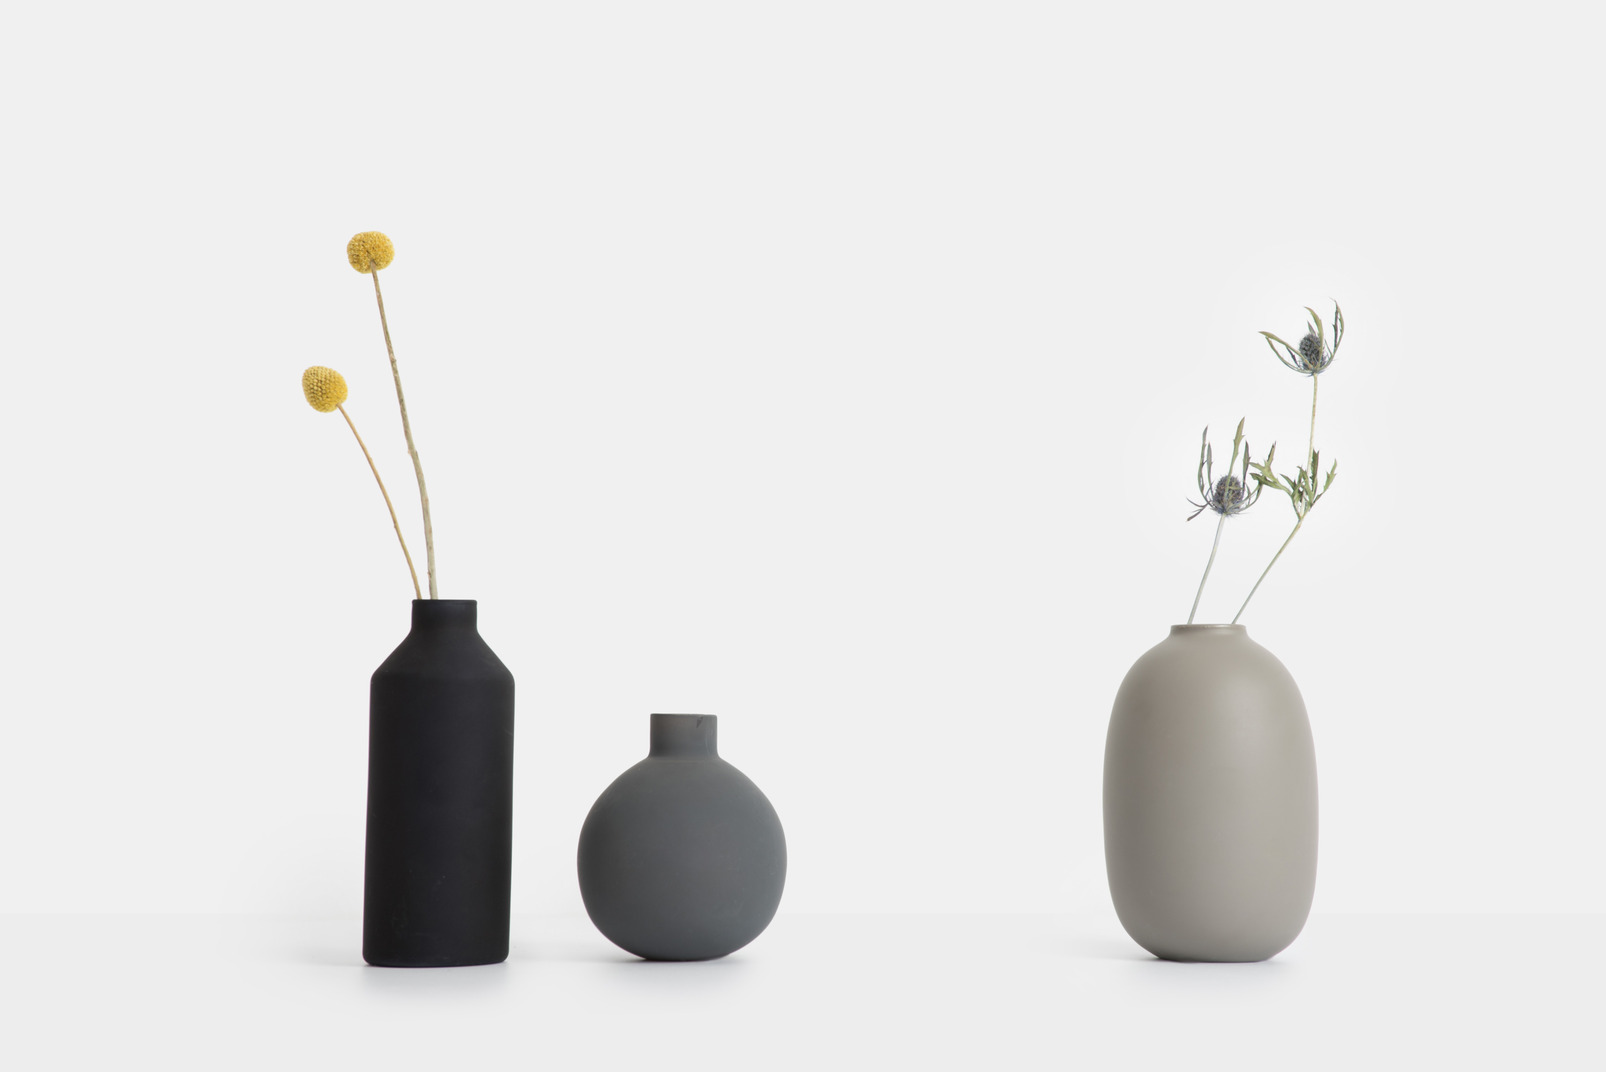 Three ceramic vases with dried flowers